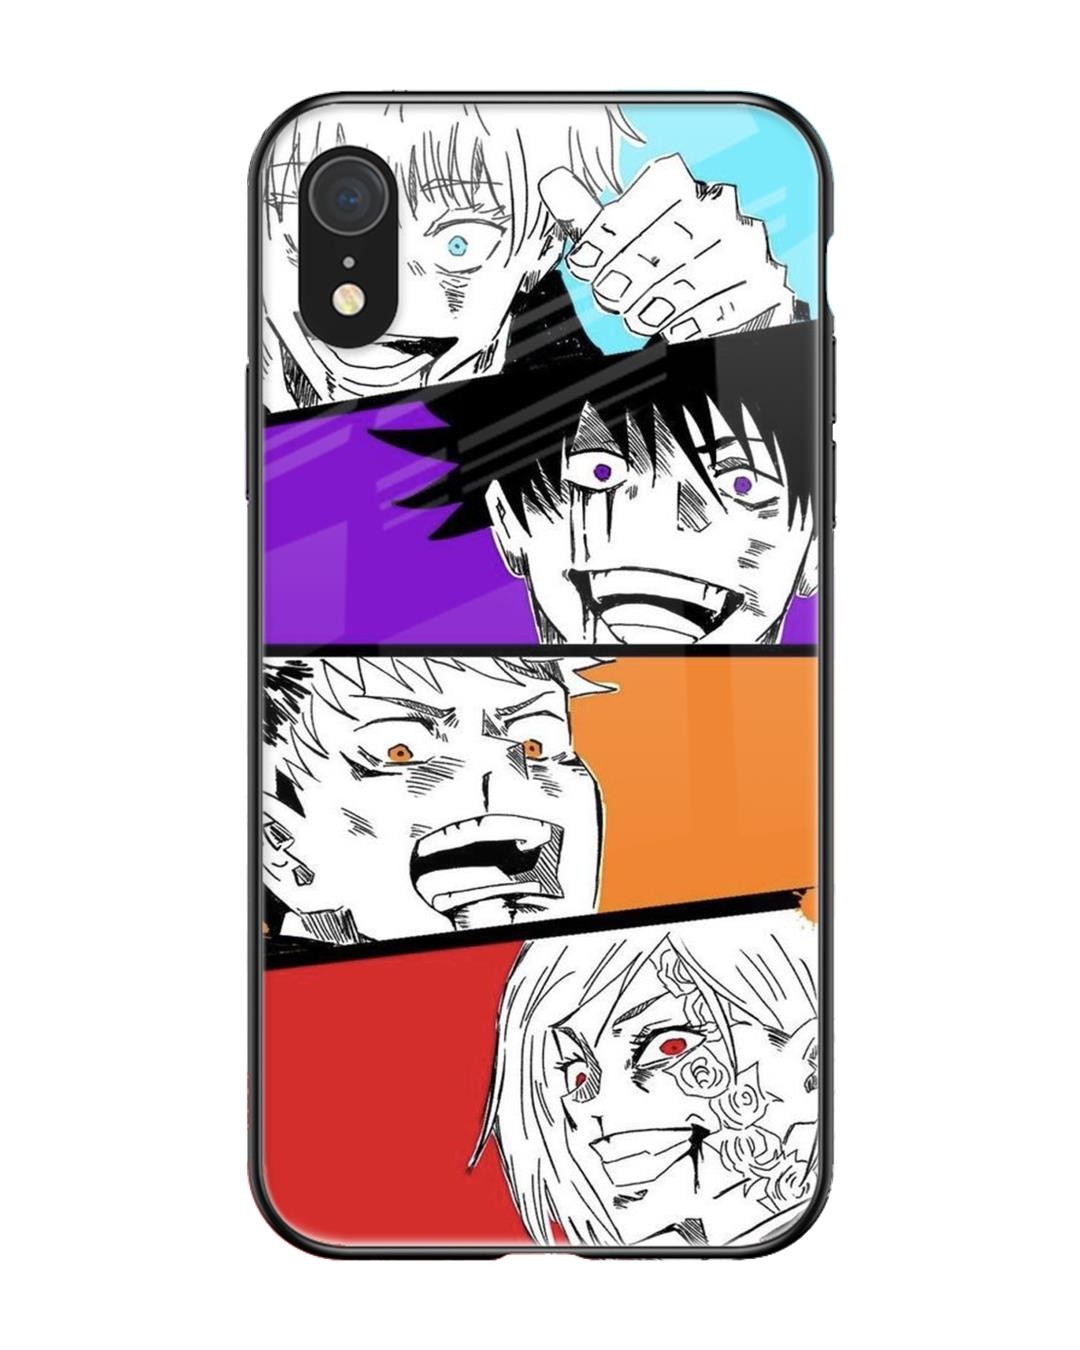 WallCraft Back Cover For APLLE iPhone XR NARUTO ANIME NEON